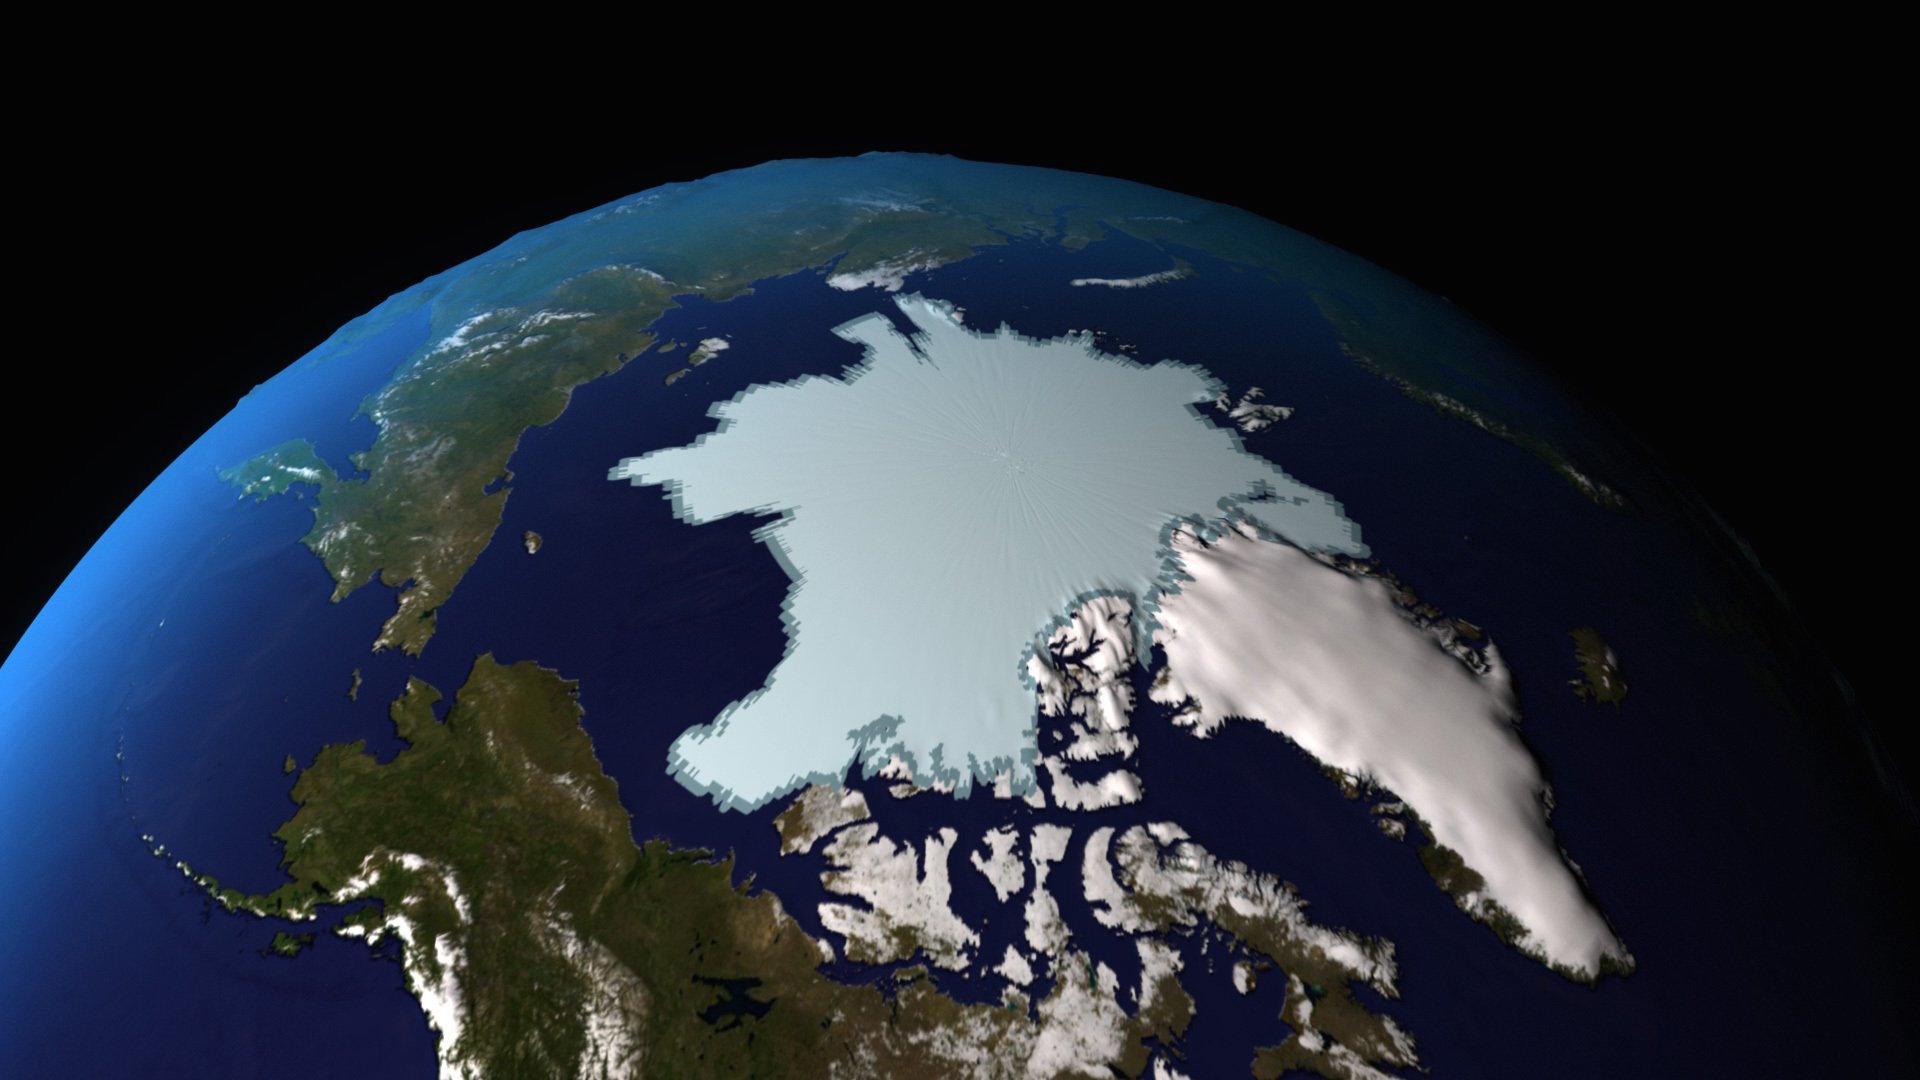 Eight nations share the territory of the Arctic, which is experiencing the fastest changes of any part of the earth as global temperatures rise. The United States will emphasize addressing the causes and impacts of climate change in the region when it tak